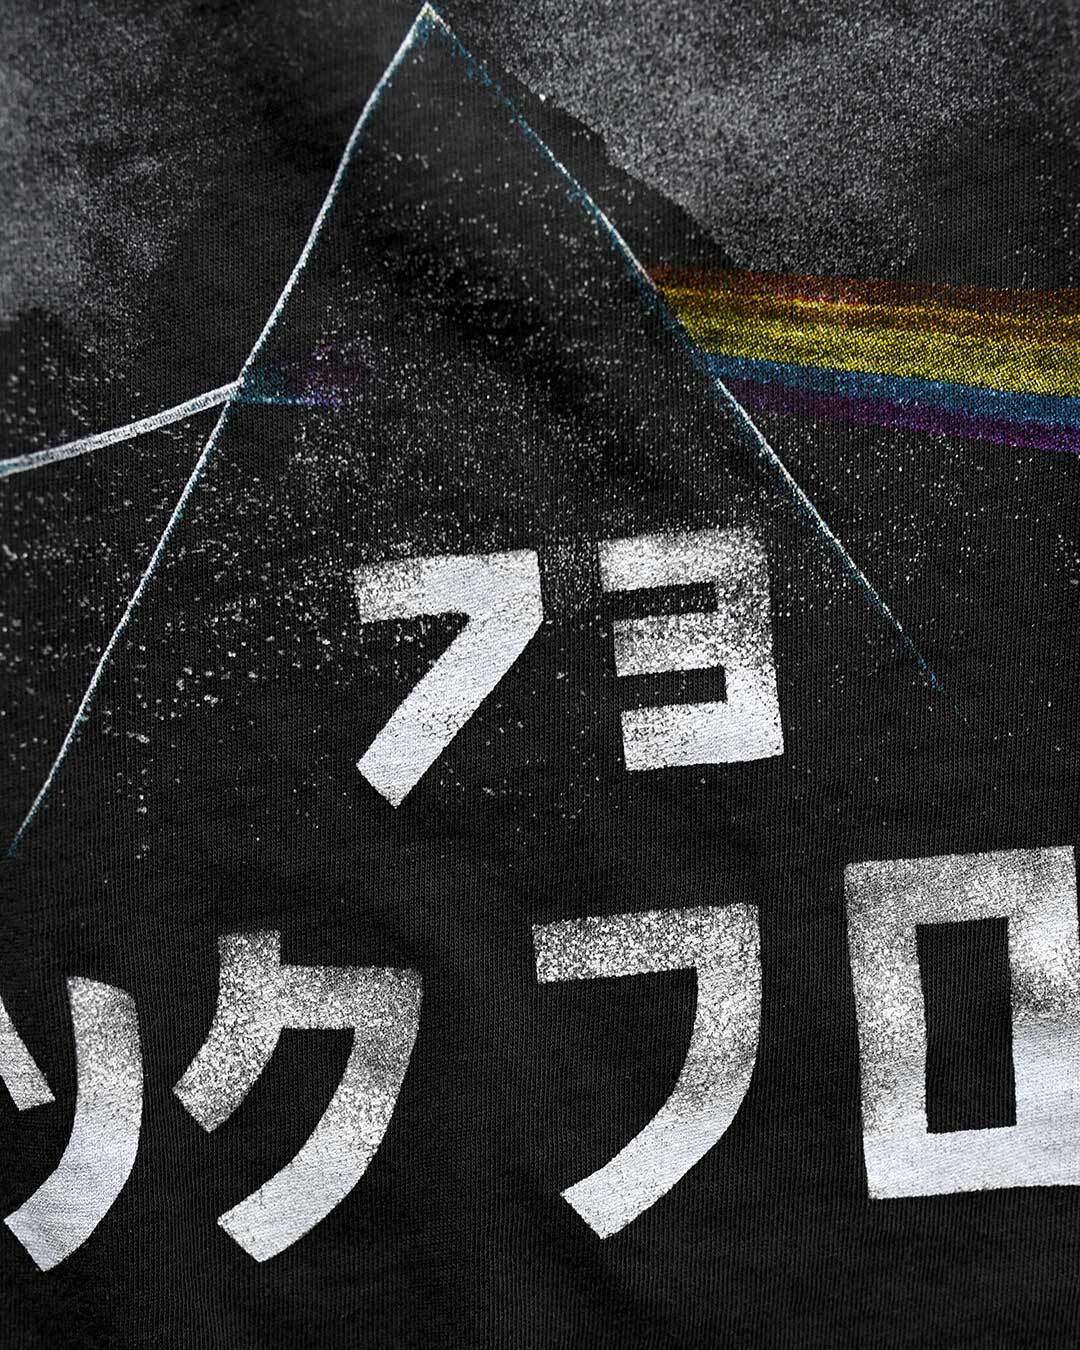 Pink Floyd Classic Prism Black Tee - Roots of Fight Canada